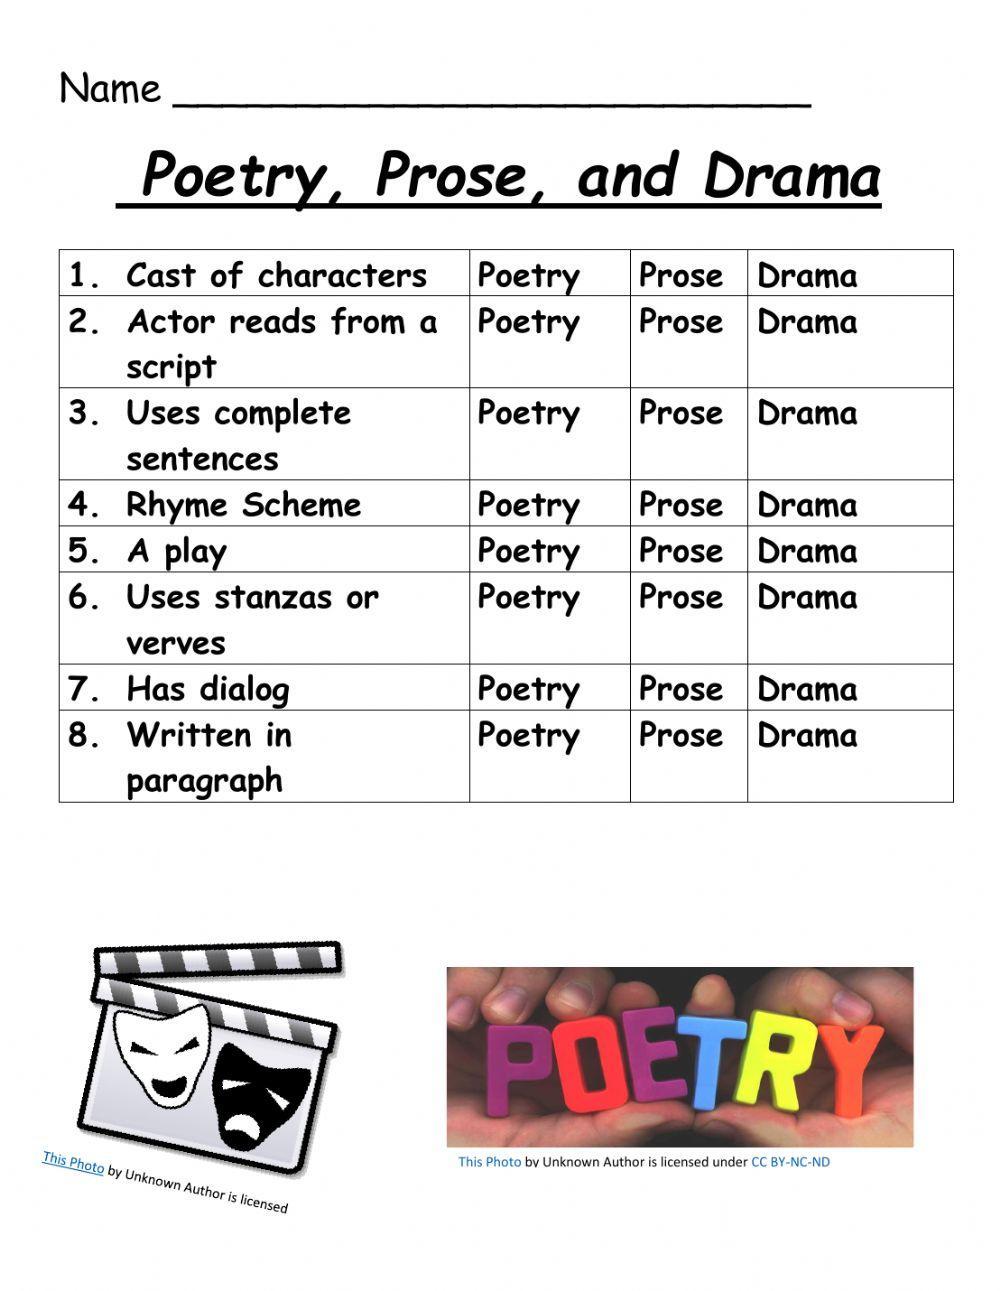 Drama, Prose, and Poetry